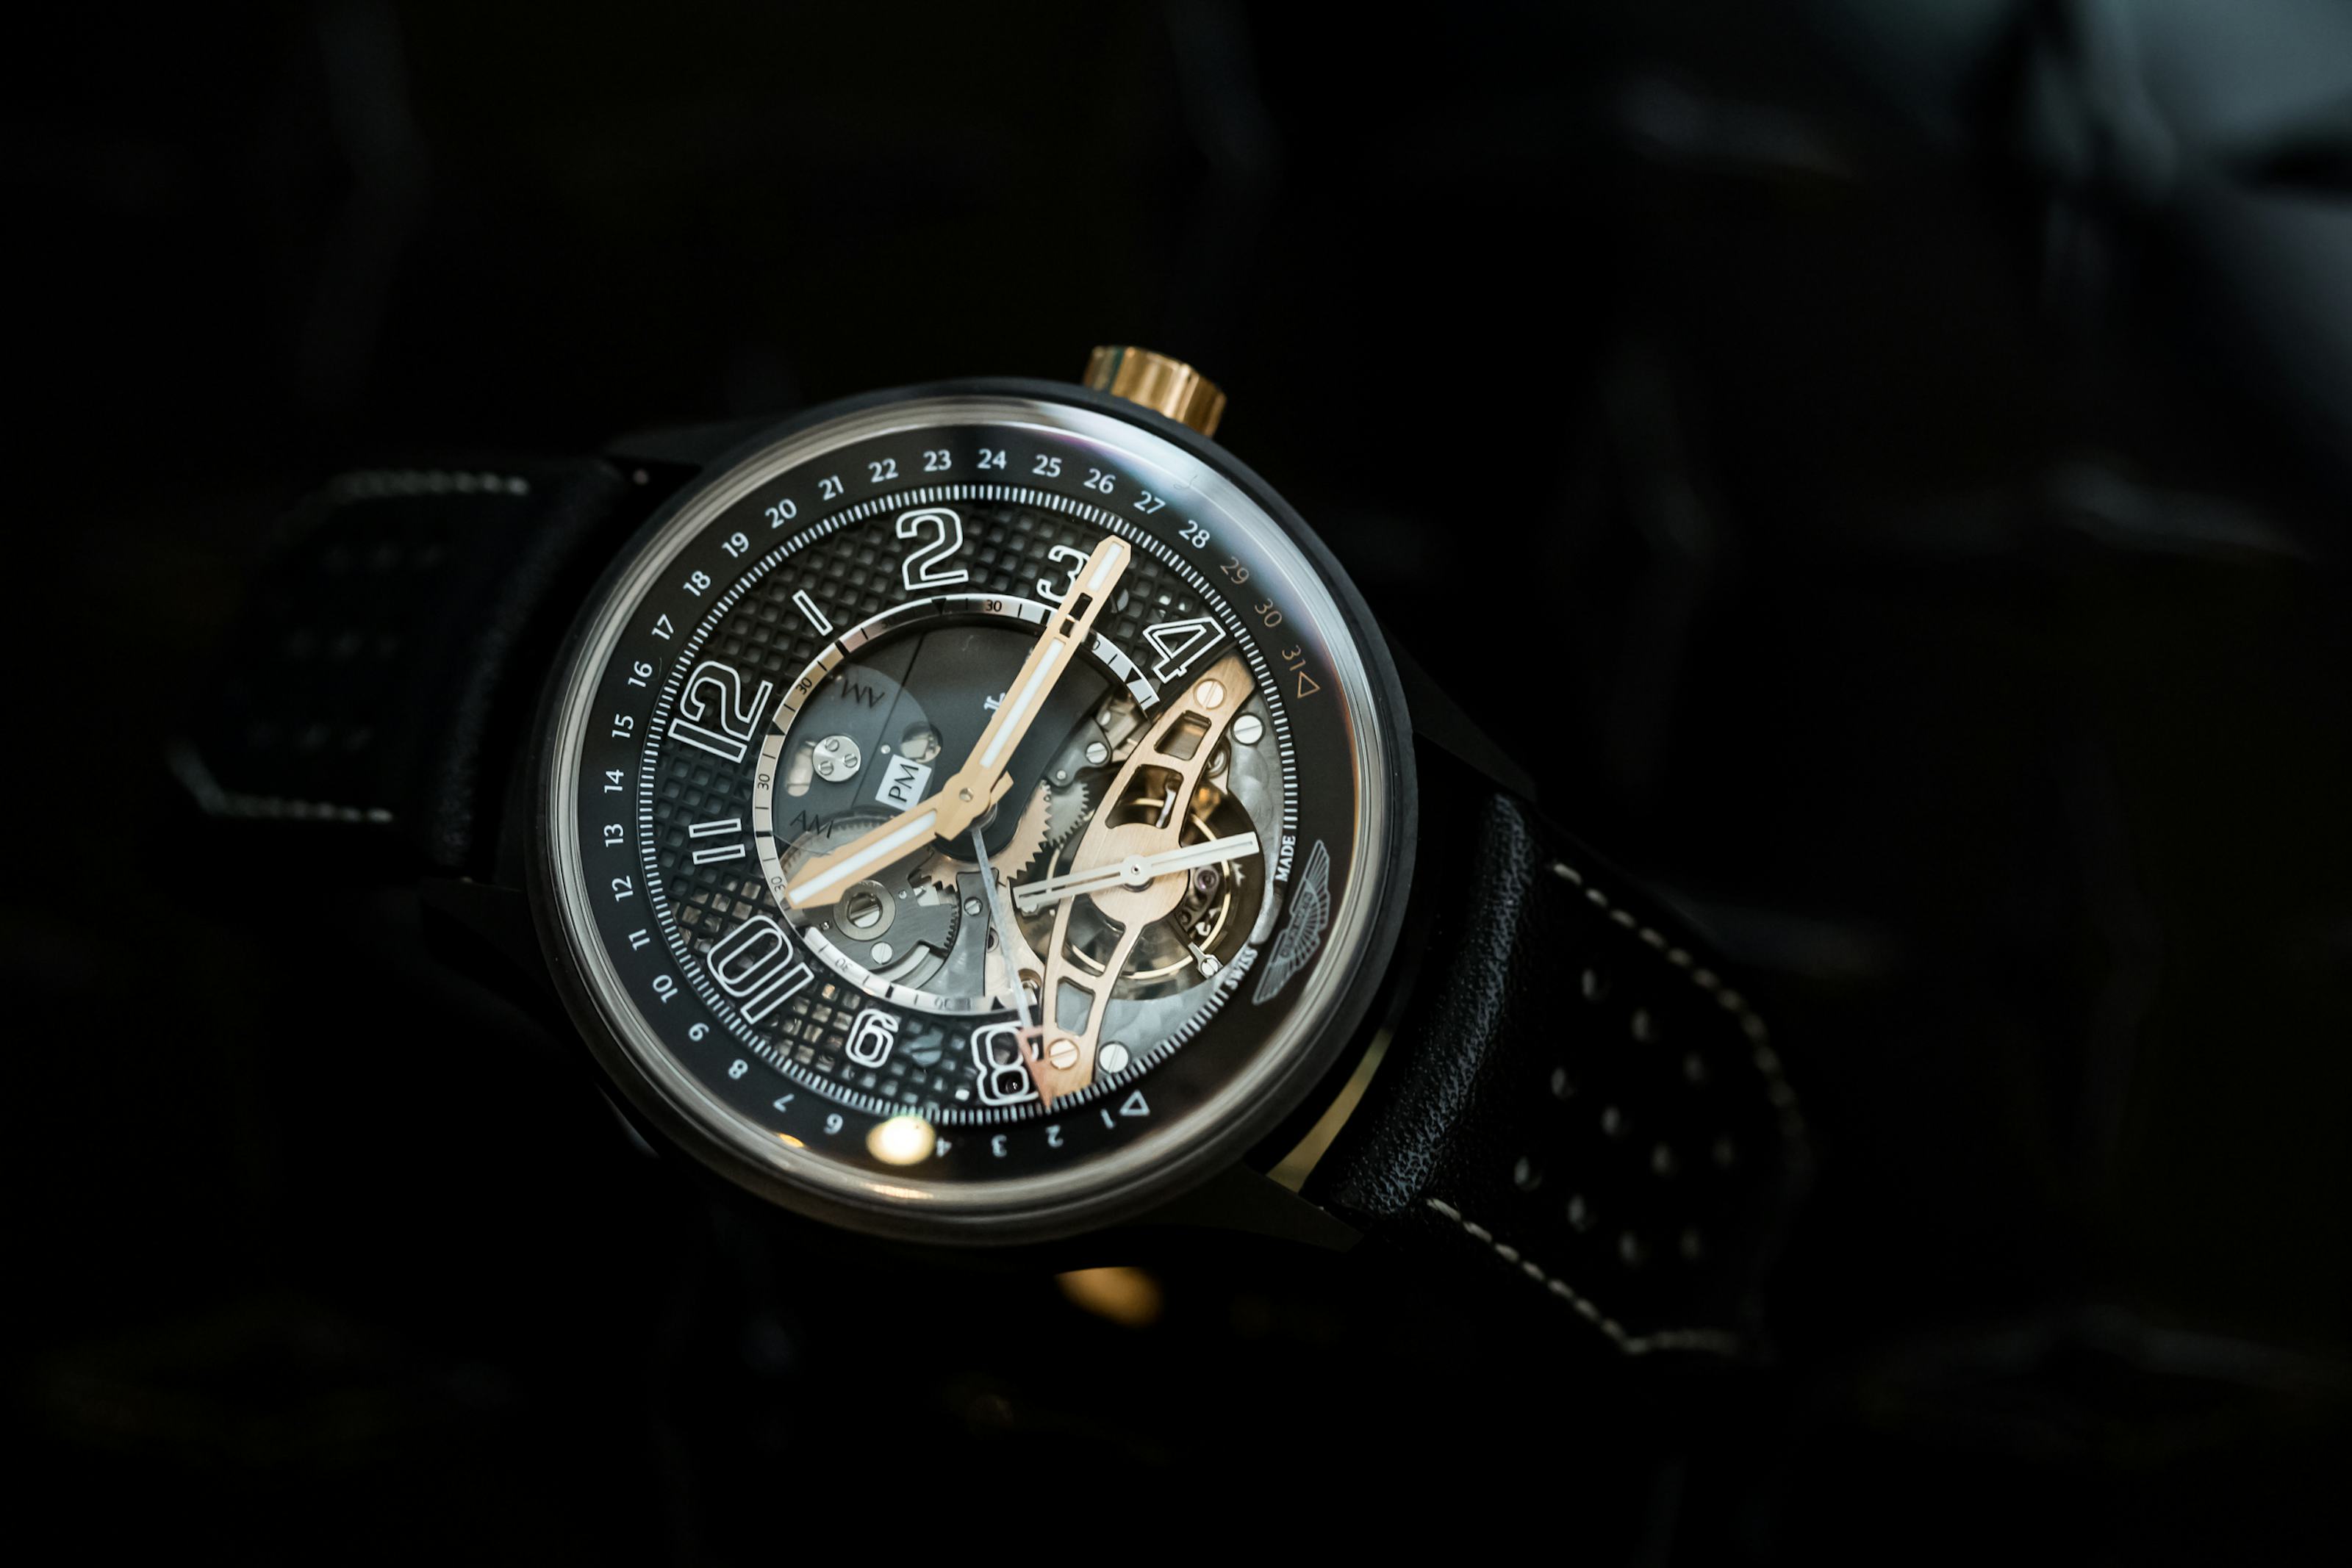 Jaeger-LeCoultre’s Amvox III: The Standard For Luxury Automotive Watch Themes